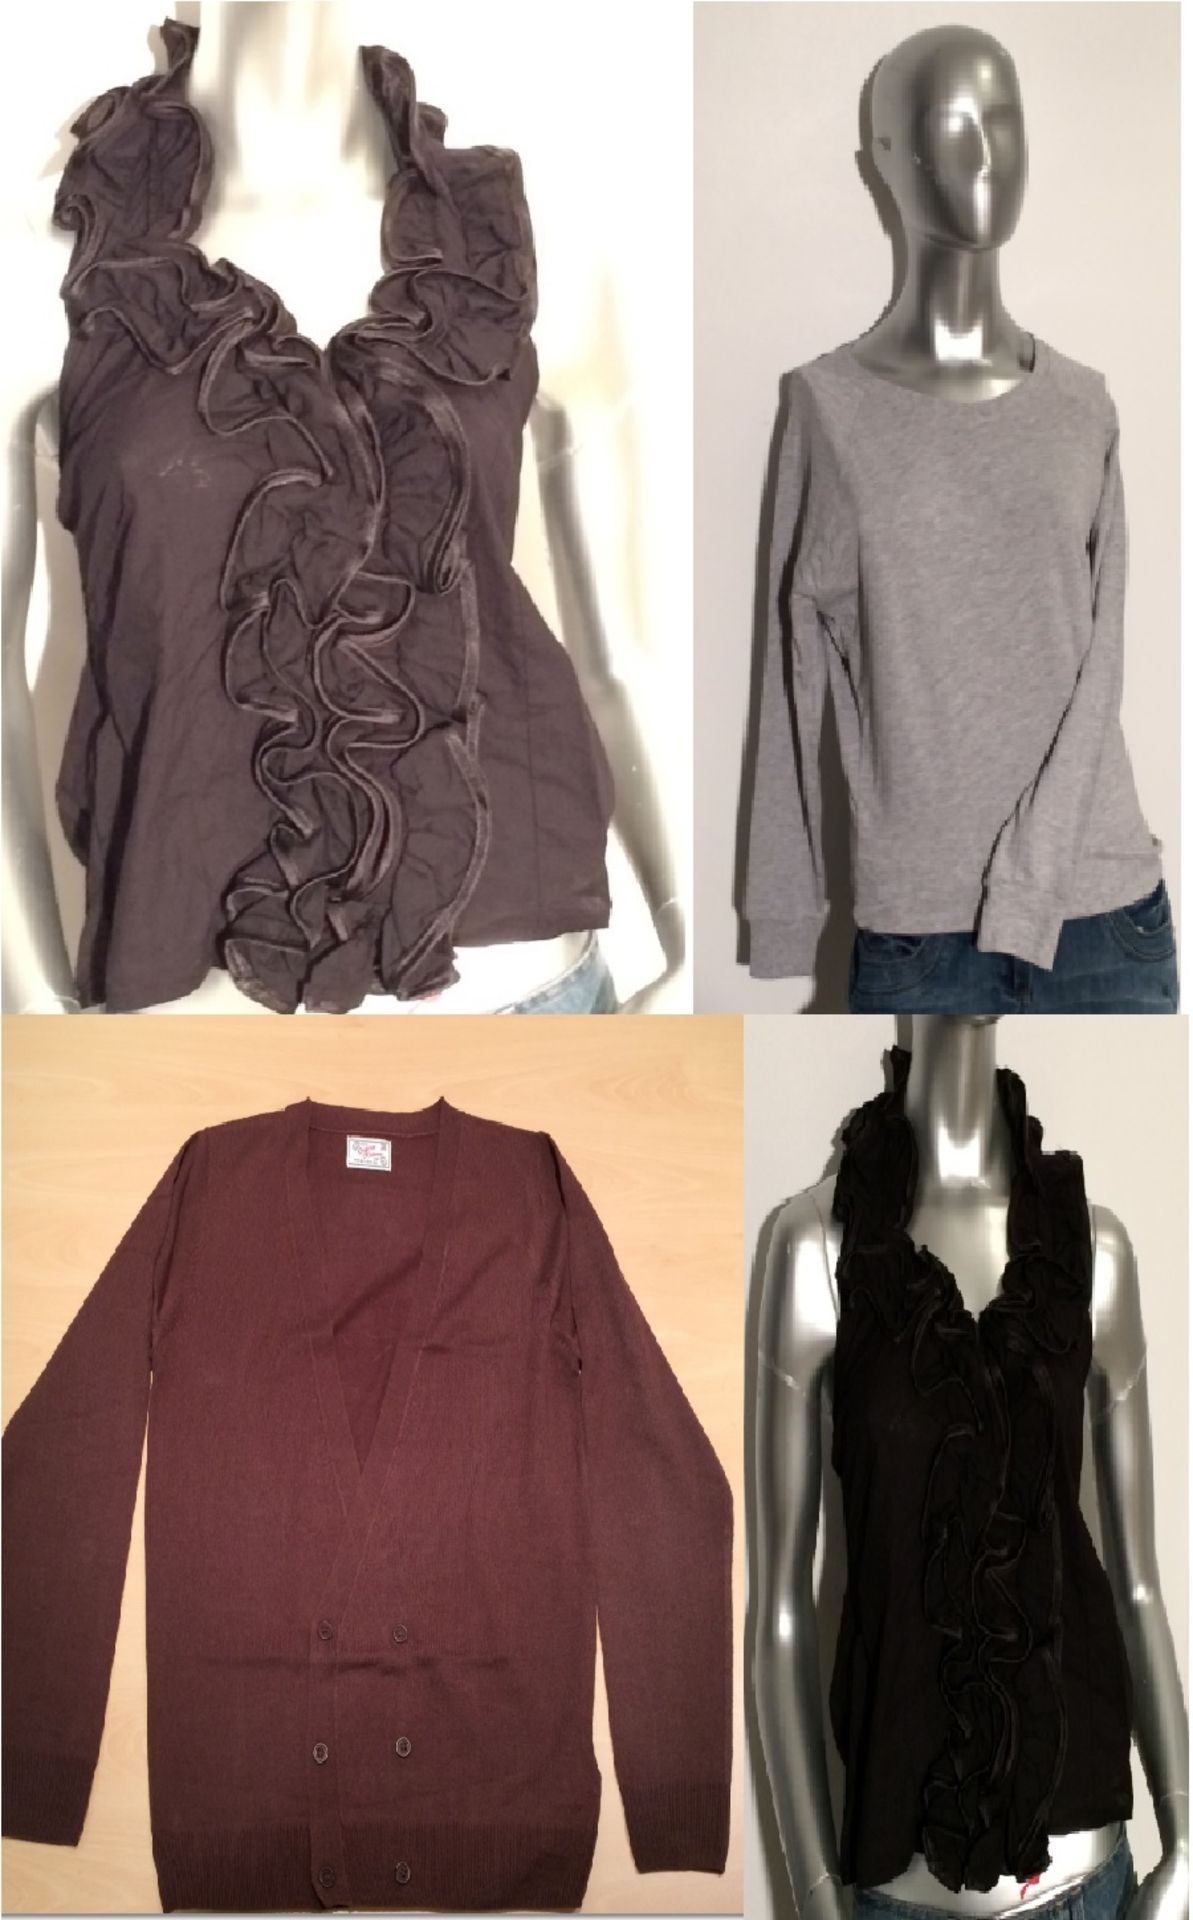 Box To Include Approx. 20 New Look Men's Cardigans in Marroon; Size S-XL/ Also Includes Approx. 21 N